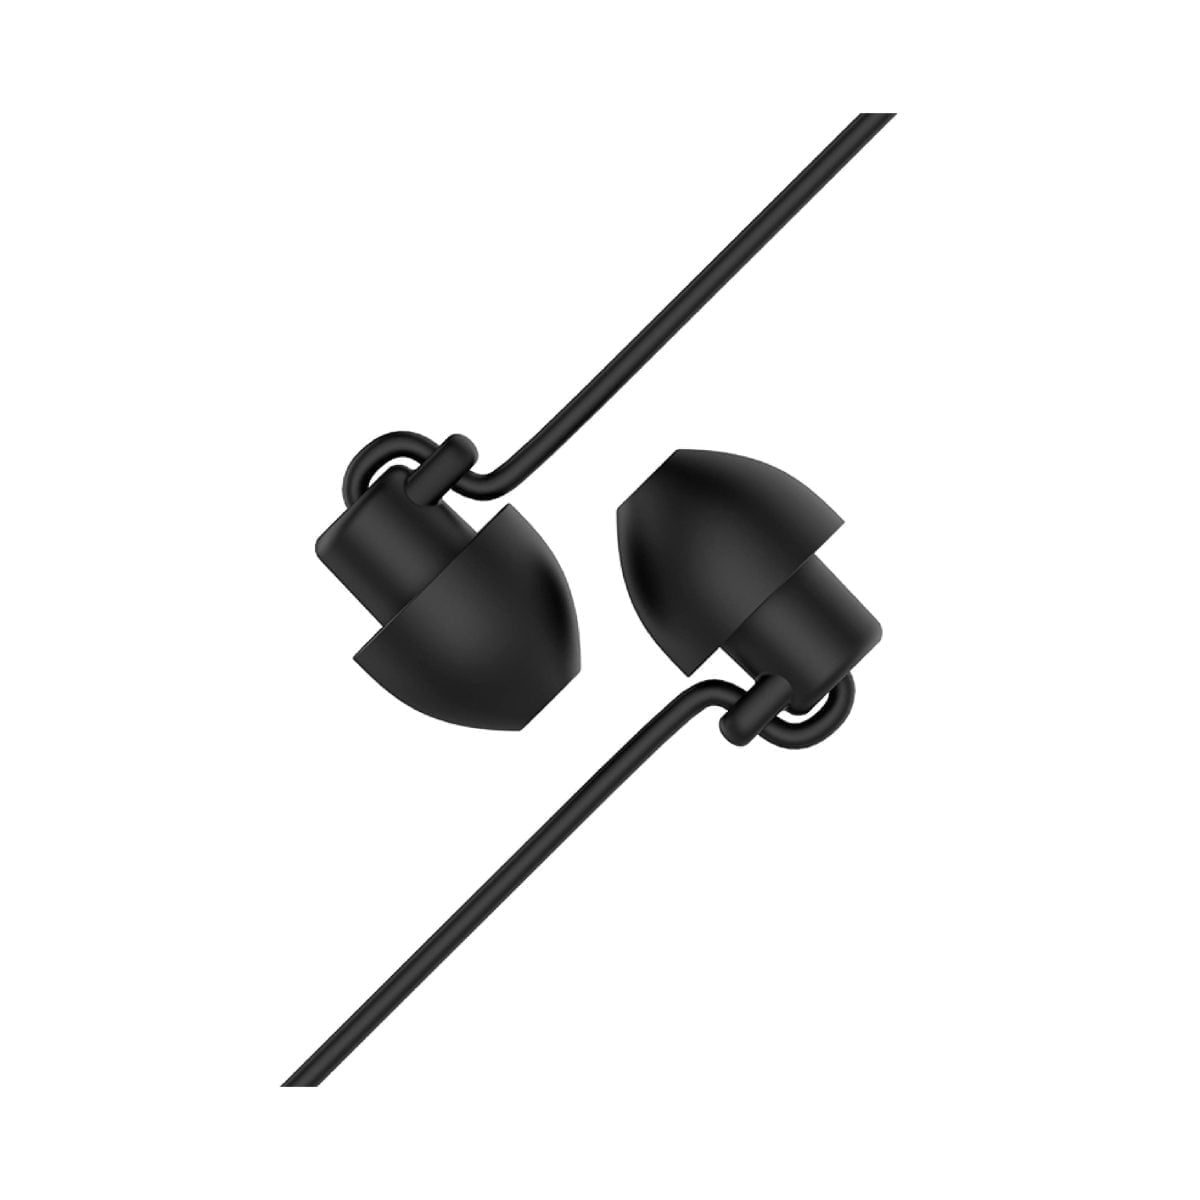 Earphone98 04 Scaled Hoco Material: Silica Gel, Tpe Enameled Wire Length: 1.2M, Weight: 10G Speaker: 6Mm Connector: 3.5Mm Microphone: With A Wheat Controller Wire Control: Single Button Control Silicone Material, Soft And Does Not Oppress The Ear, Suitable For Sleeping Silicon Sleep Earphones M56 Earphone Wired Headphones With Mic – White